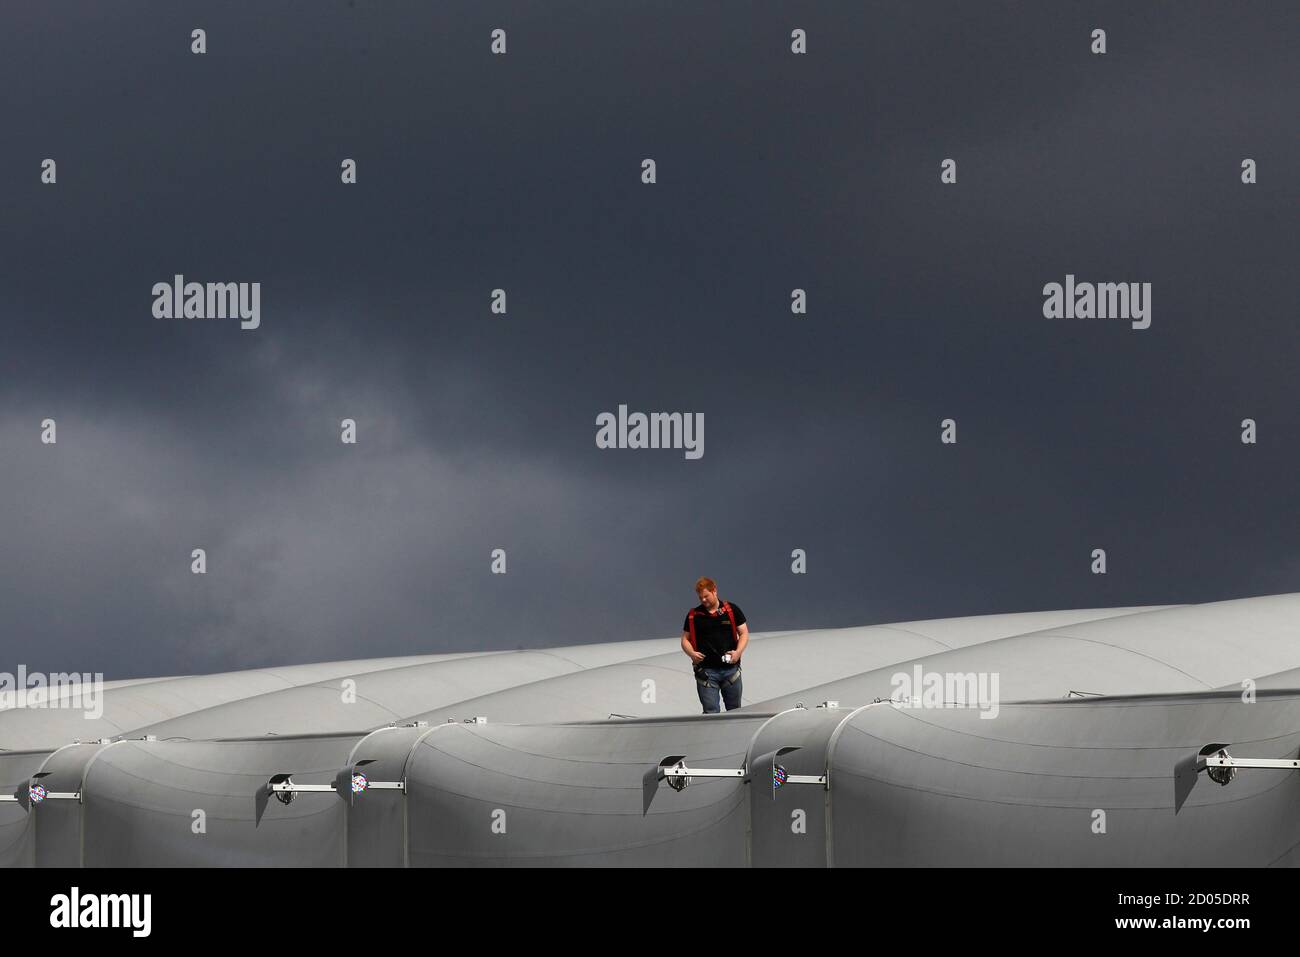 A worker stands on the roof of the Olympic water polo arena in Olympic Park, Stratford, east London, July 19, 2012. The 2012 London Olympic Games will begin in just over a week.  REUTERS/Andrew Winning (BRITAIN - Tags: SPORT OLYMPICS) Stock Photo